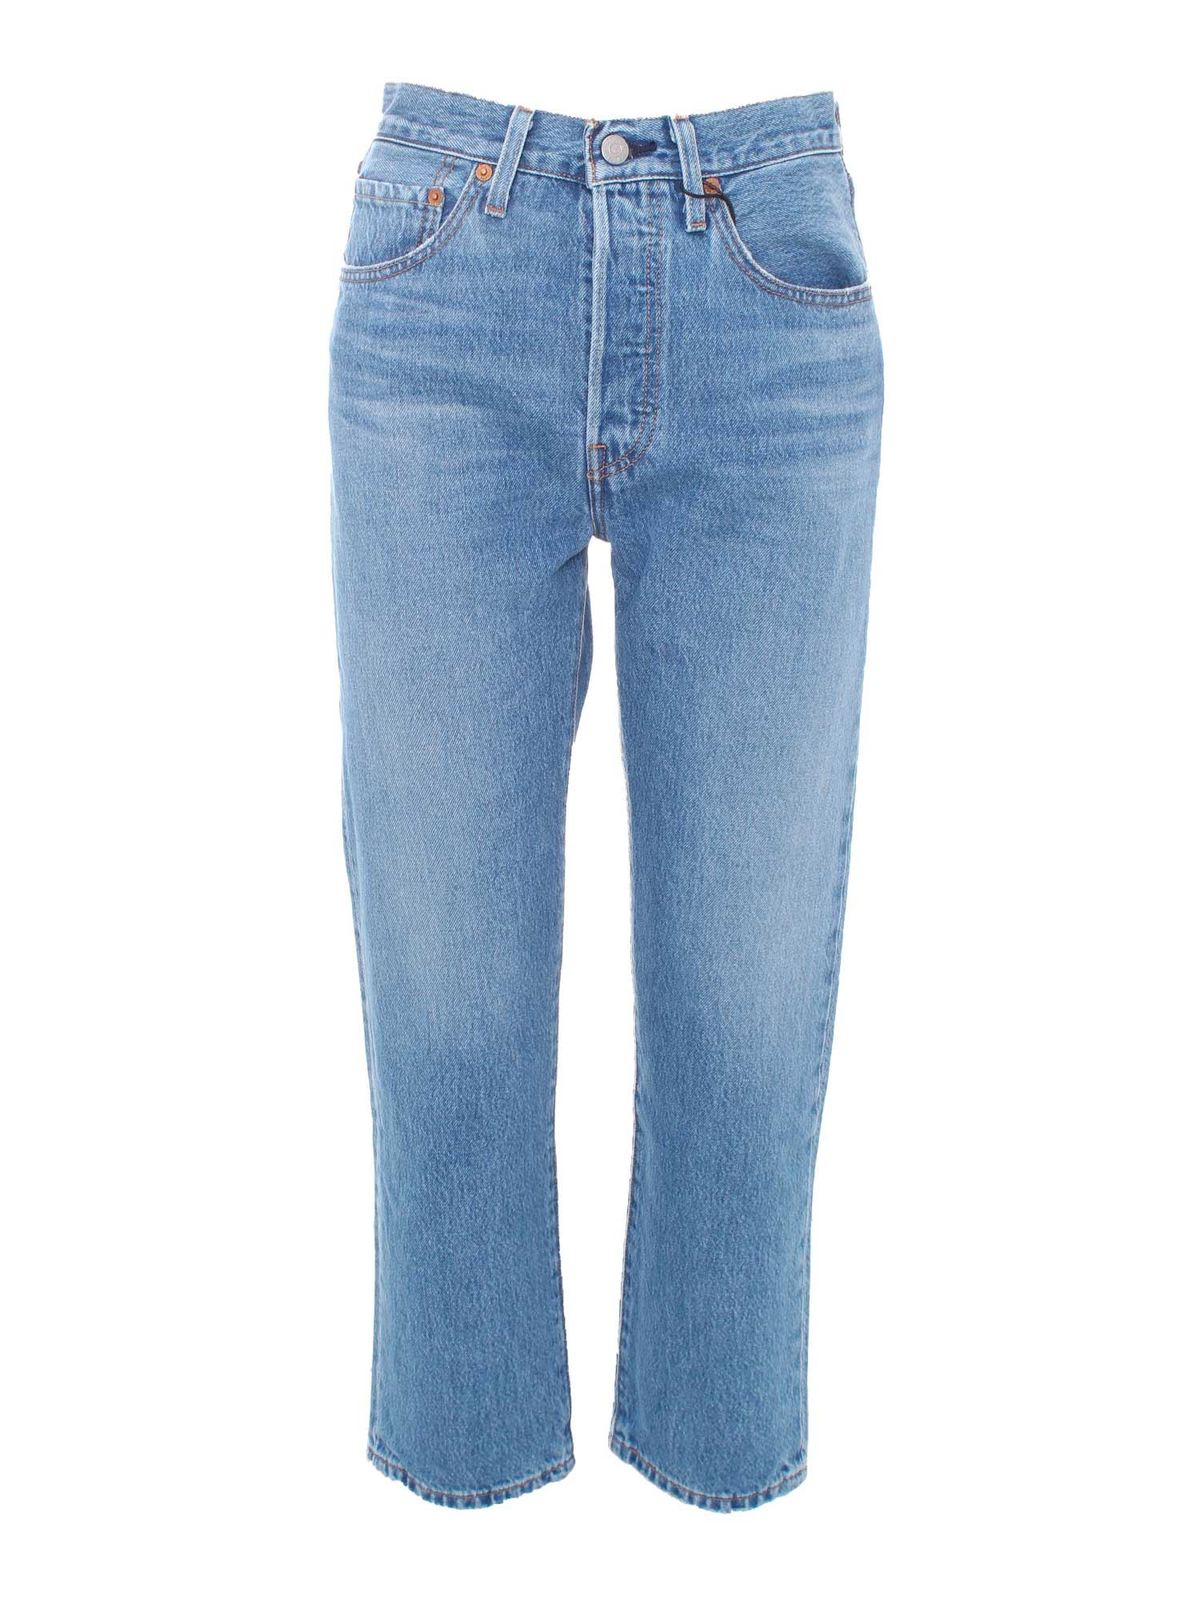 LEVI'S 501 CROPPED JEANS IN MEDIUM BLUE